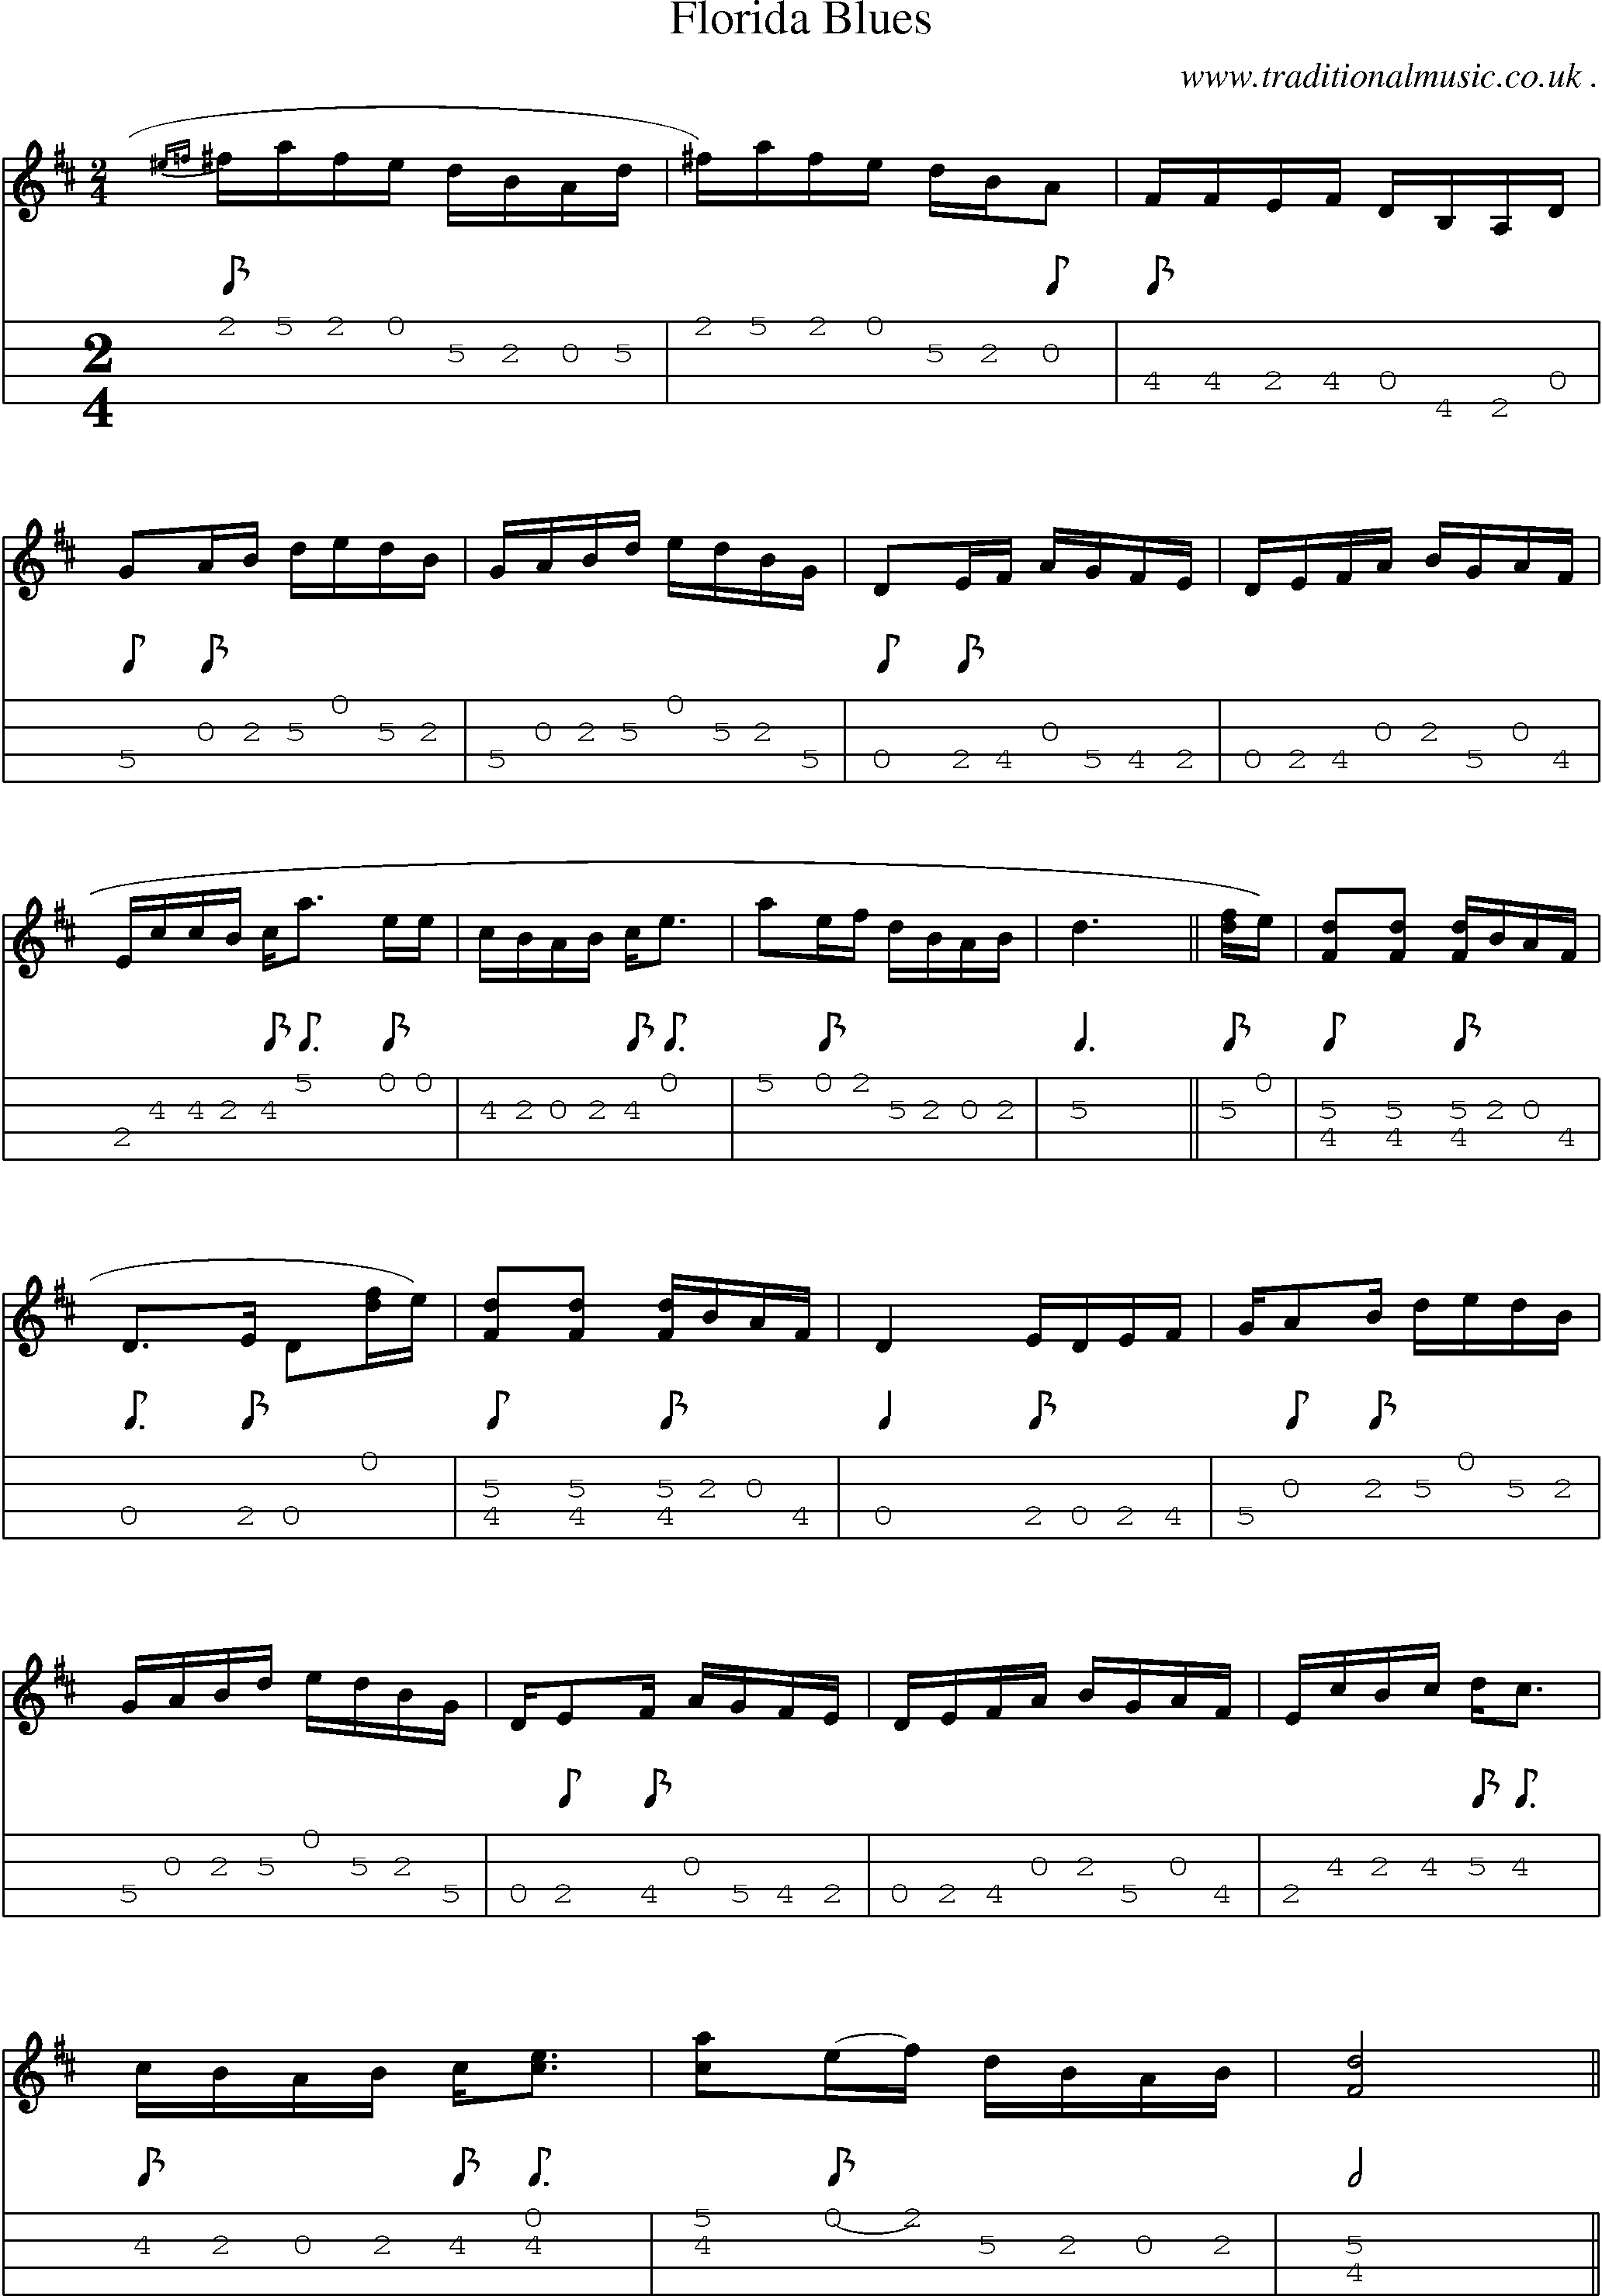 Music Score and Mandolin Tabs for Florida Blues